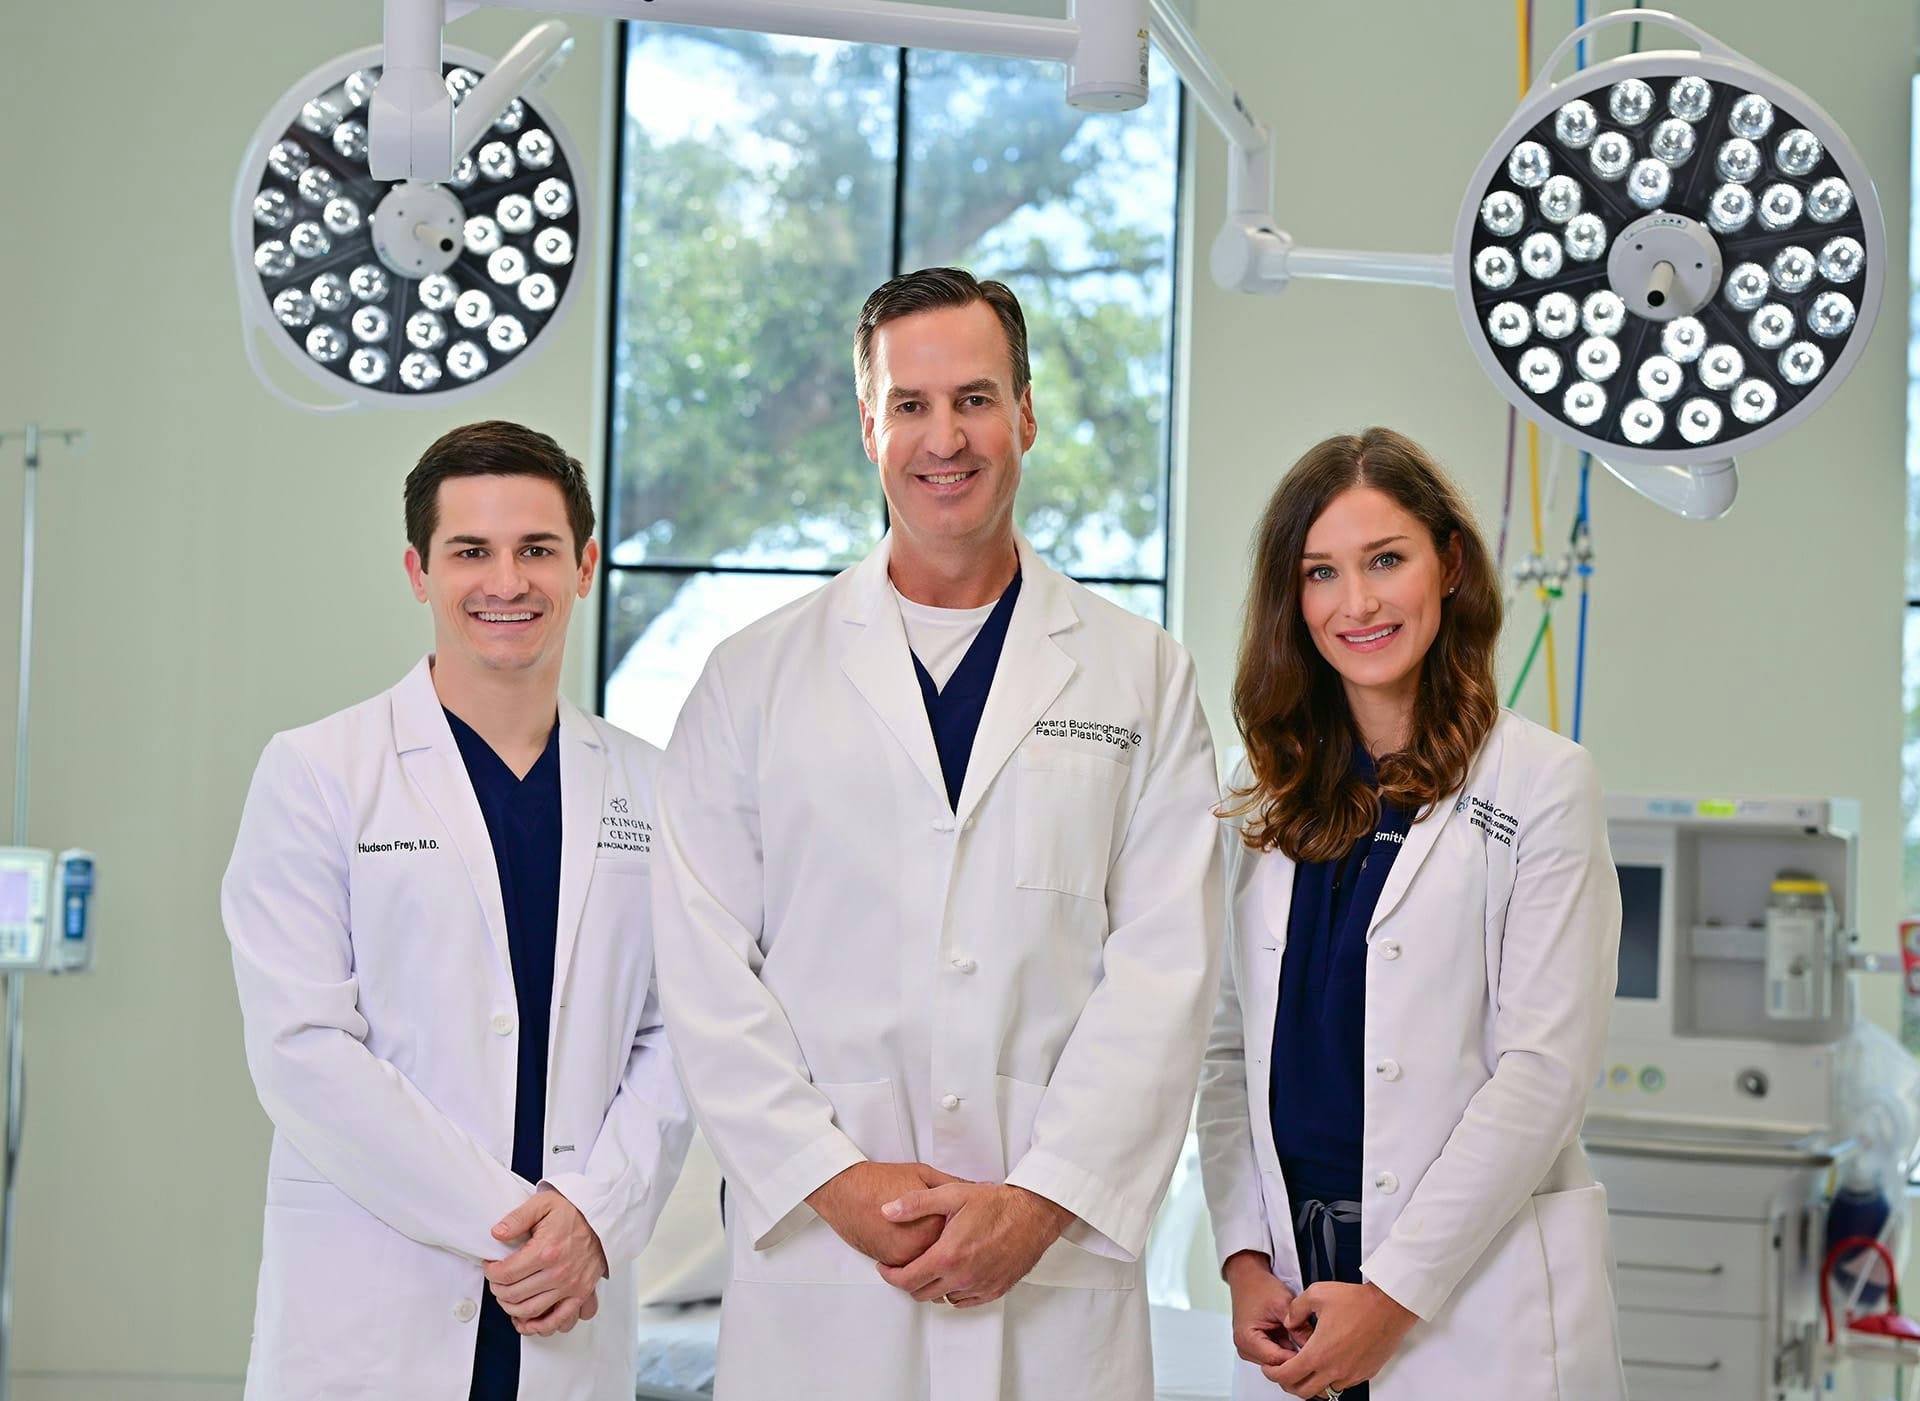 staff at the Buckingham Center for Facial Plastic Surgery